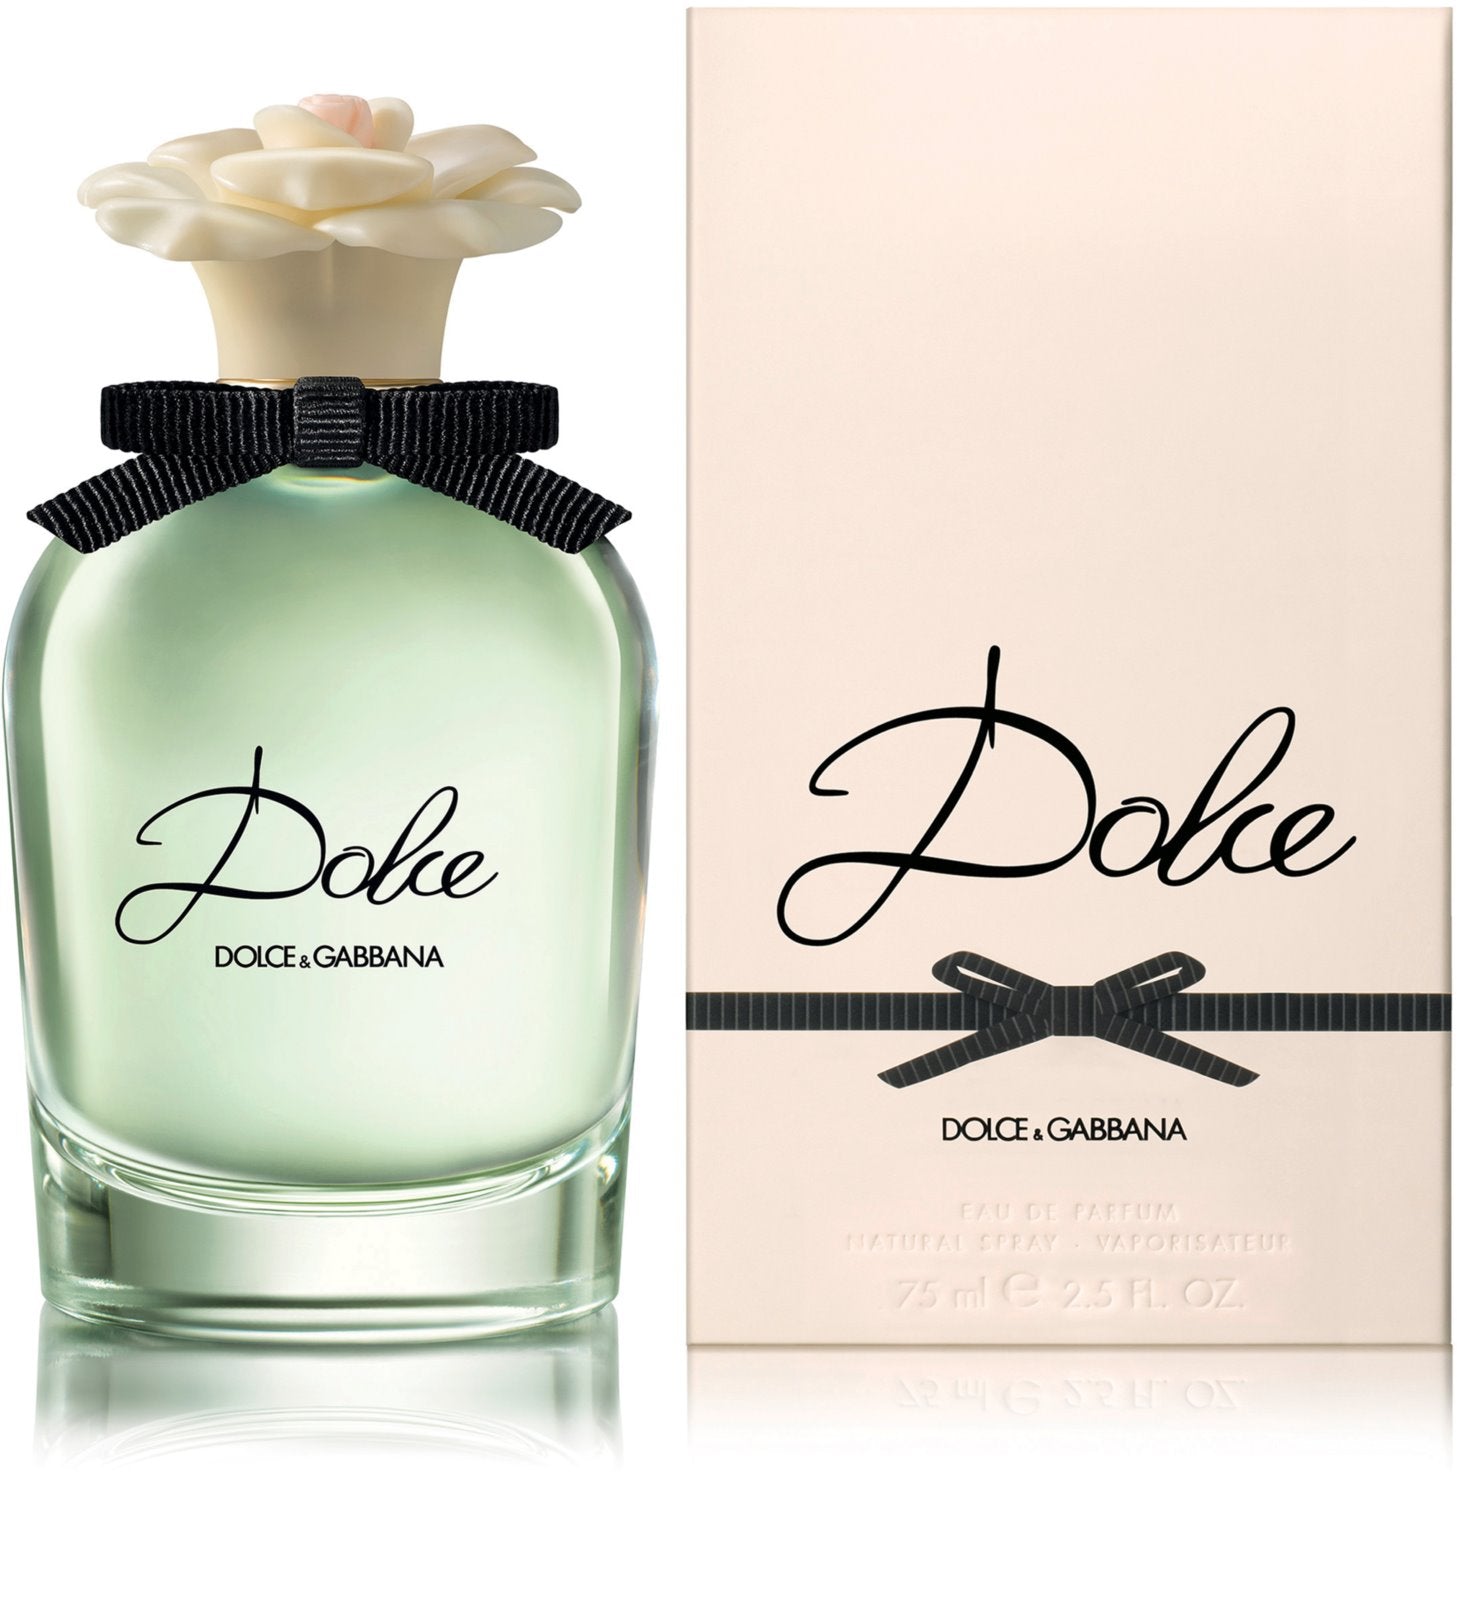 Dolce Edp For Her Perfume Planet